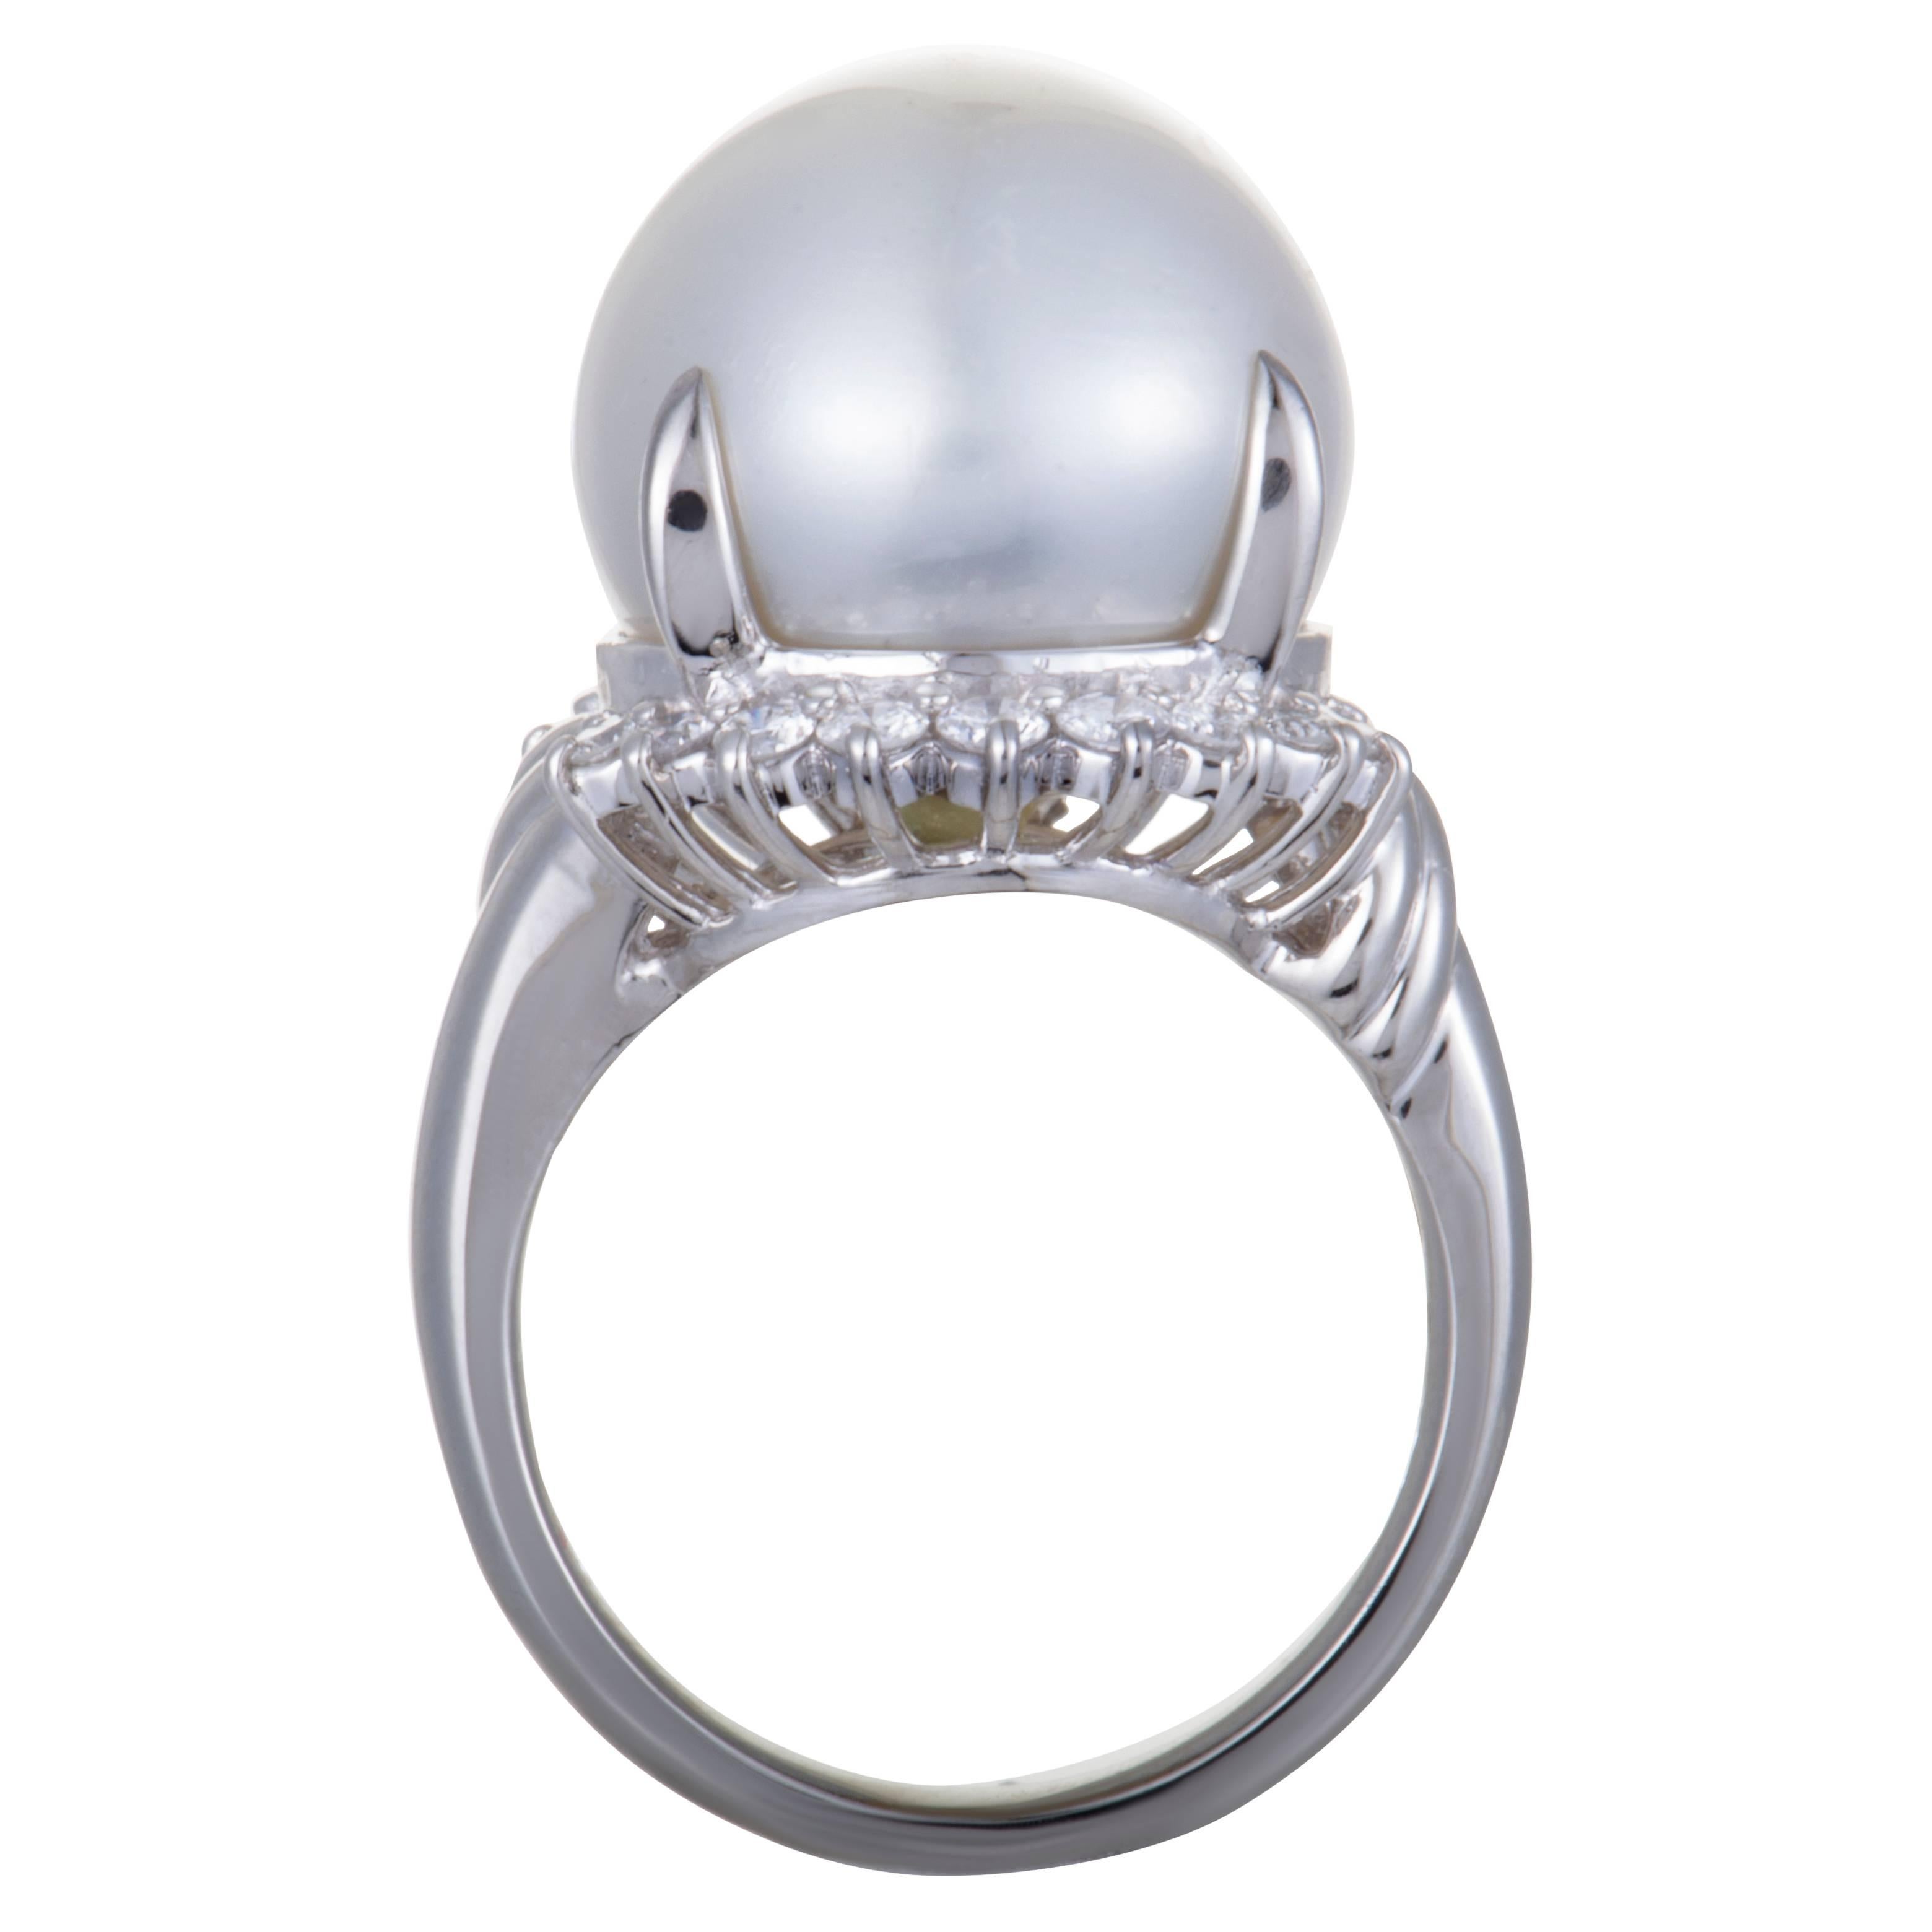 Beautifully crafted in shimmering platinum, this gorgeous ring is a beauty. The exemplary ring is embellished in 0.50ct of dazzling diamonds and and elegant white pearl of 12mm that make the piece absolutely exquisite.
Ring Size: 6.5
Ring Top